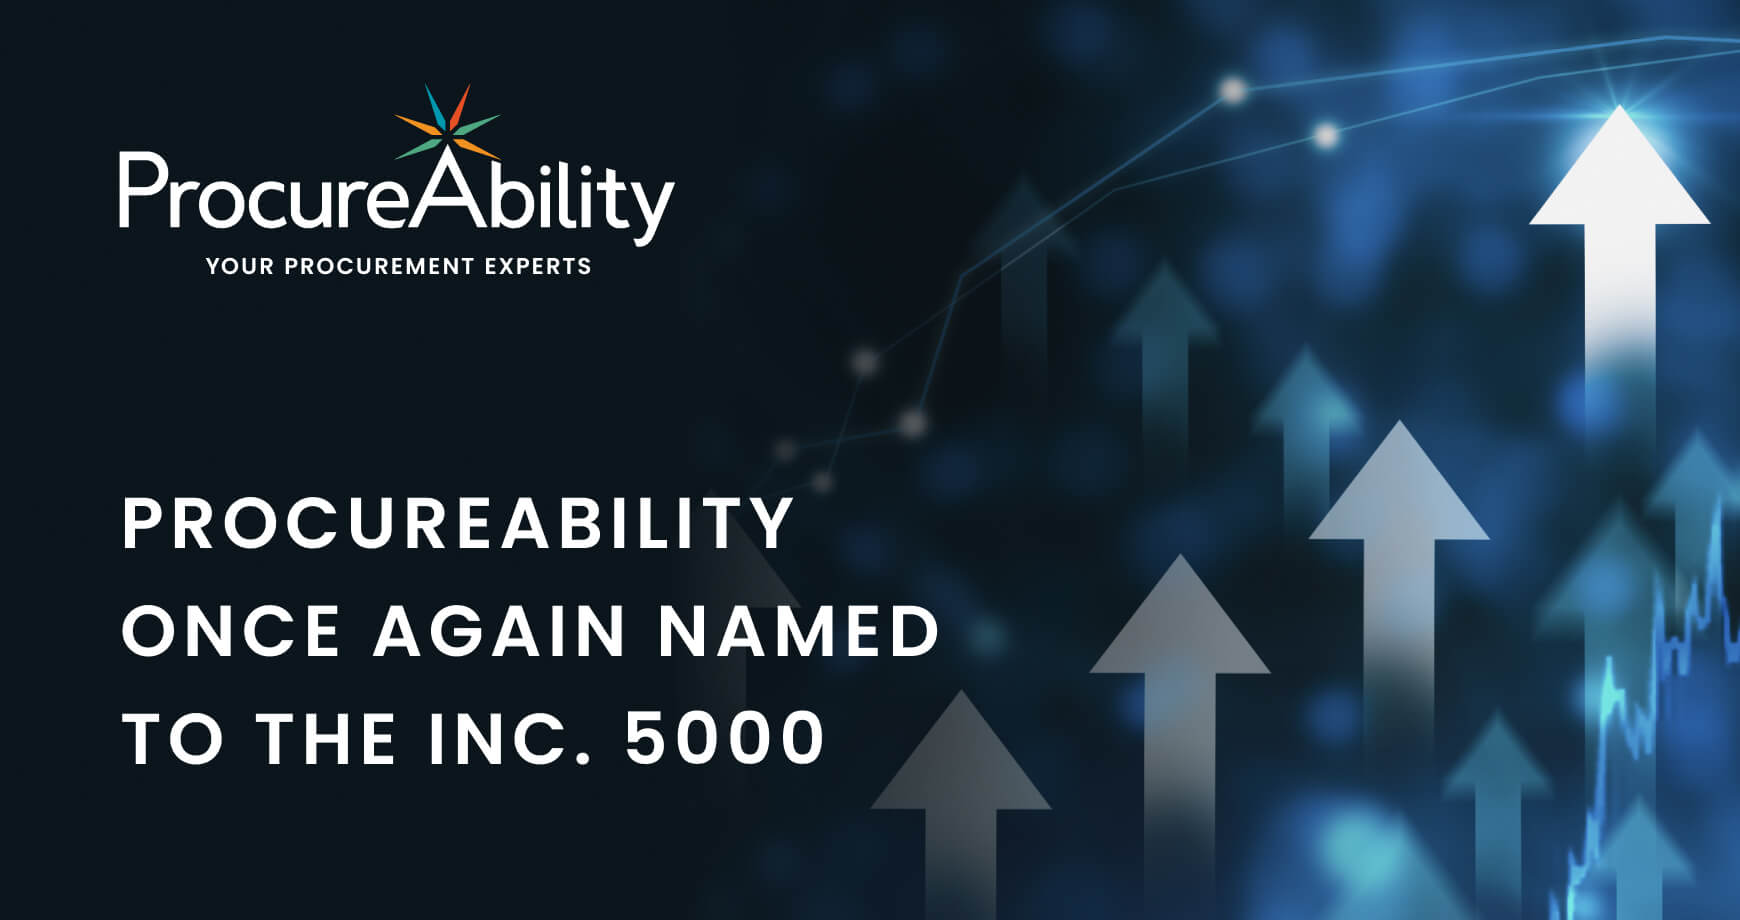 ProcureAbility once again named to the Inc. 5000 List of America’s Fastest-Growing Private Companies